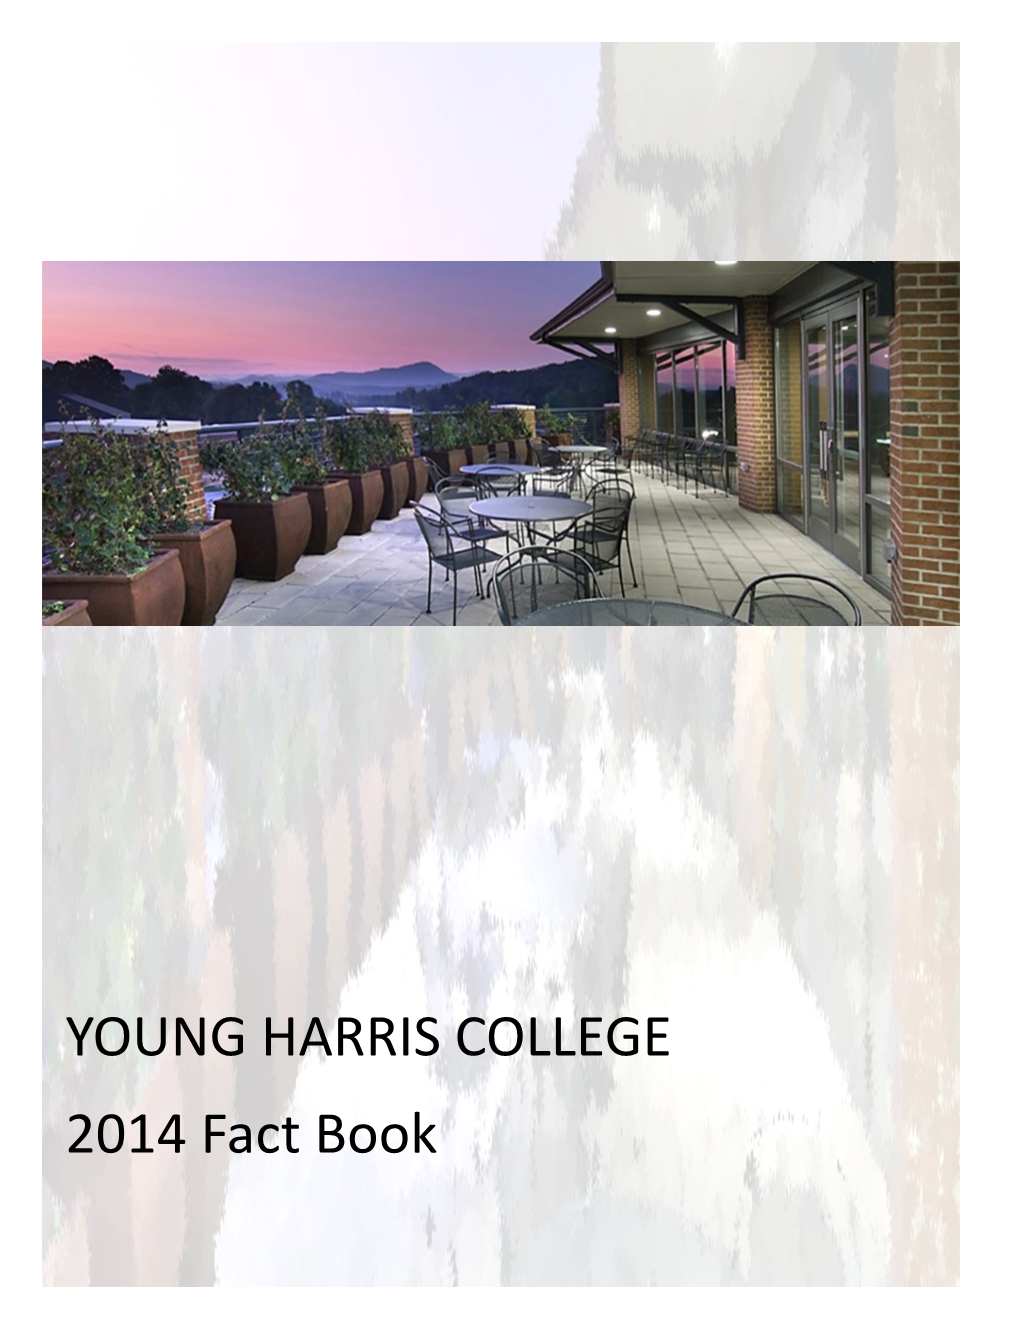 YOUNG HARRIS COLLEGE 2014 Fact Book